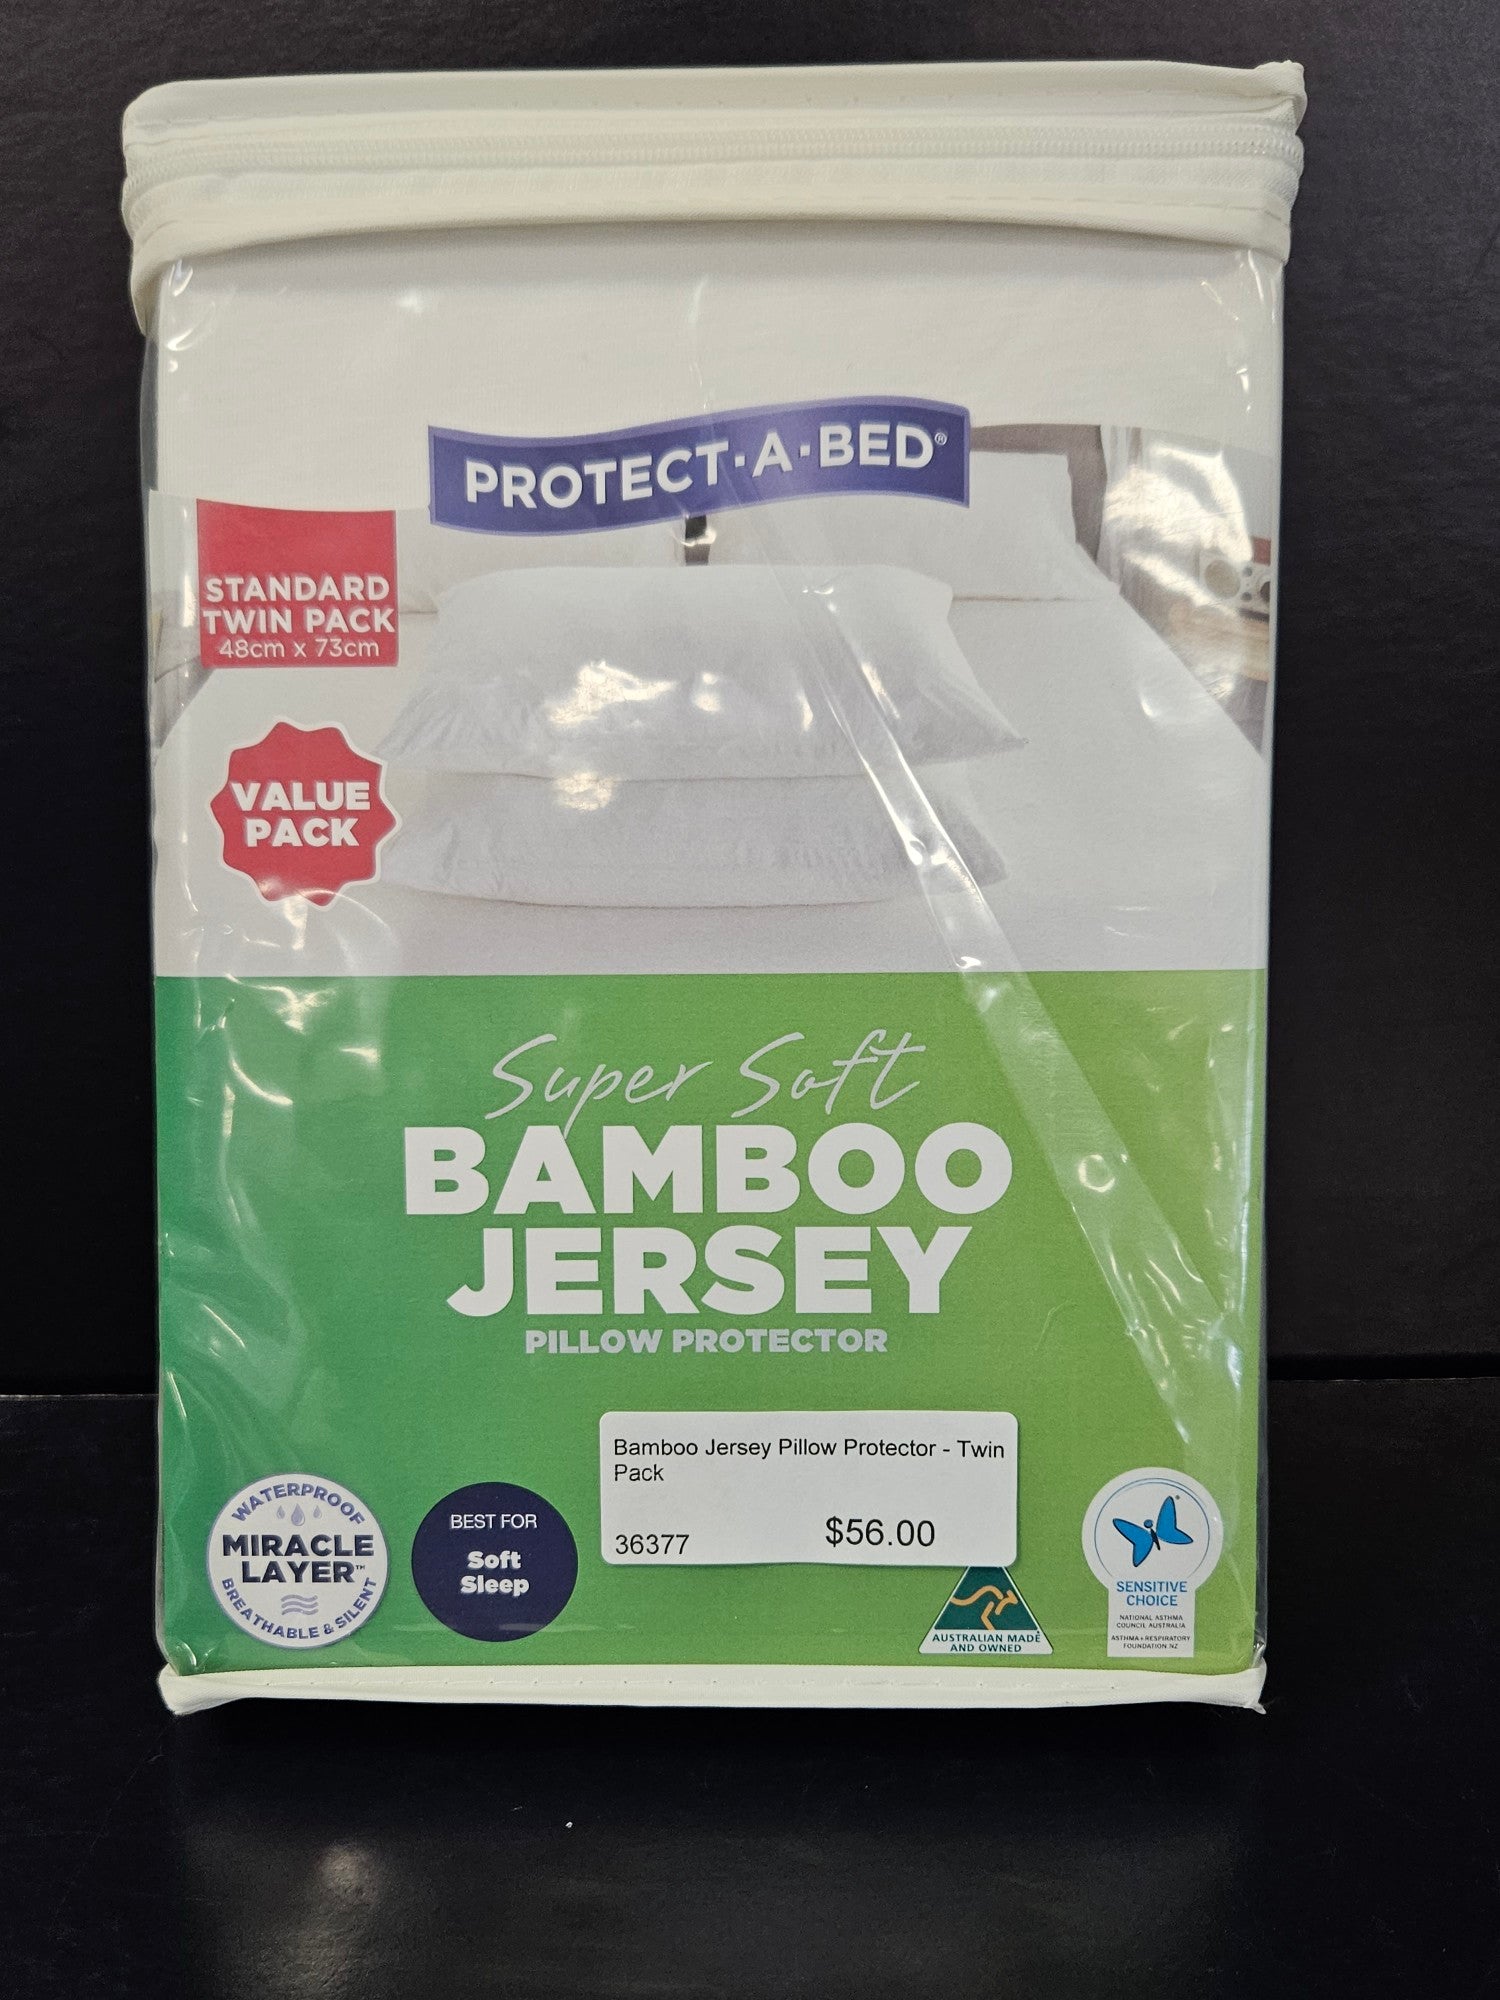 Bamboo Jersey Pillow Protector - Twin Pack